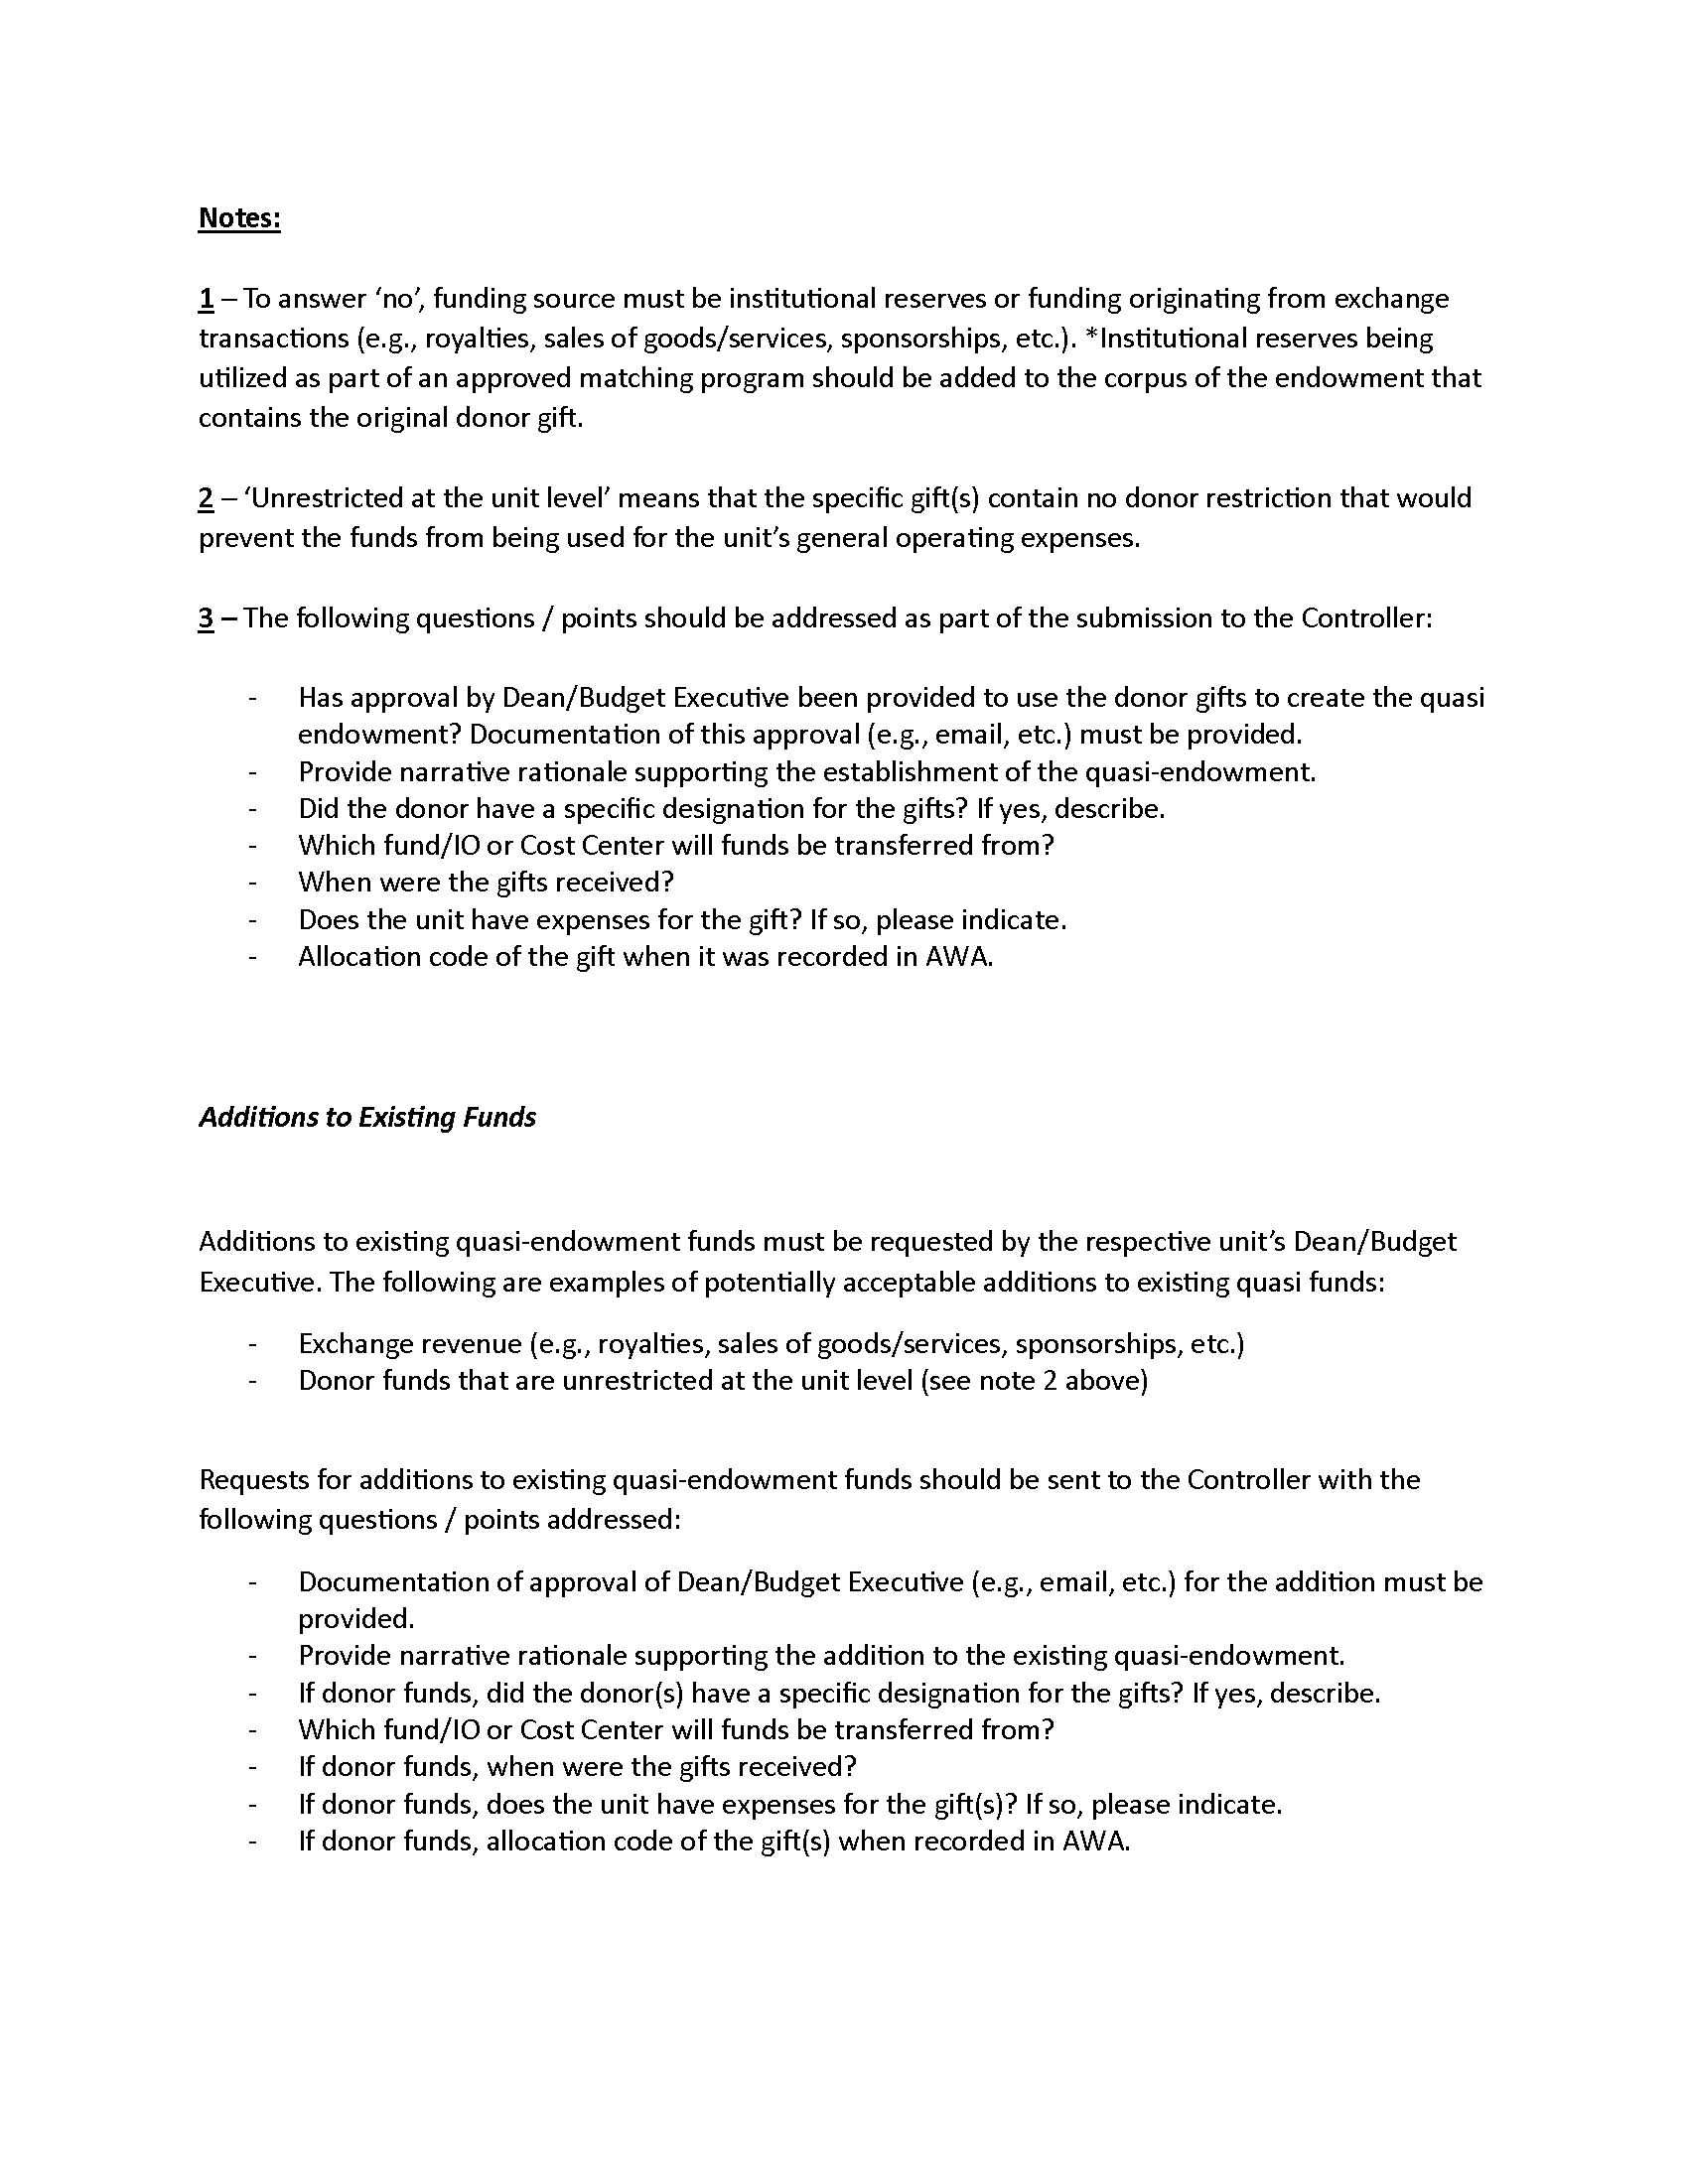 Image of Page 2 of the Quasi-Endowment Funds Decision Tool